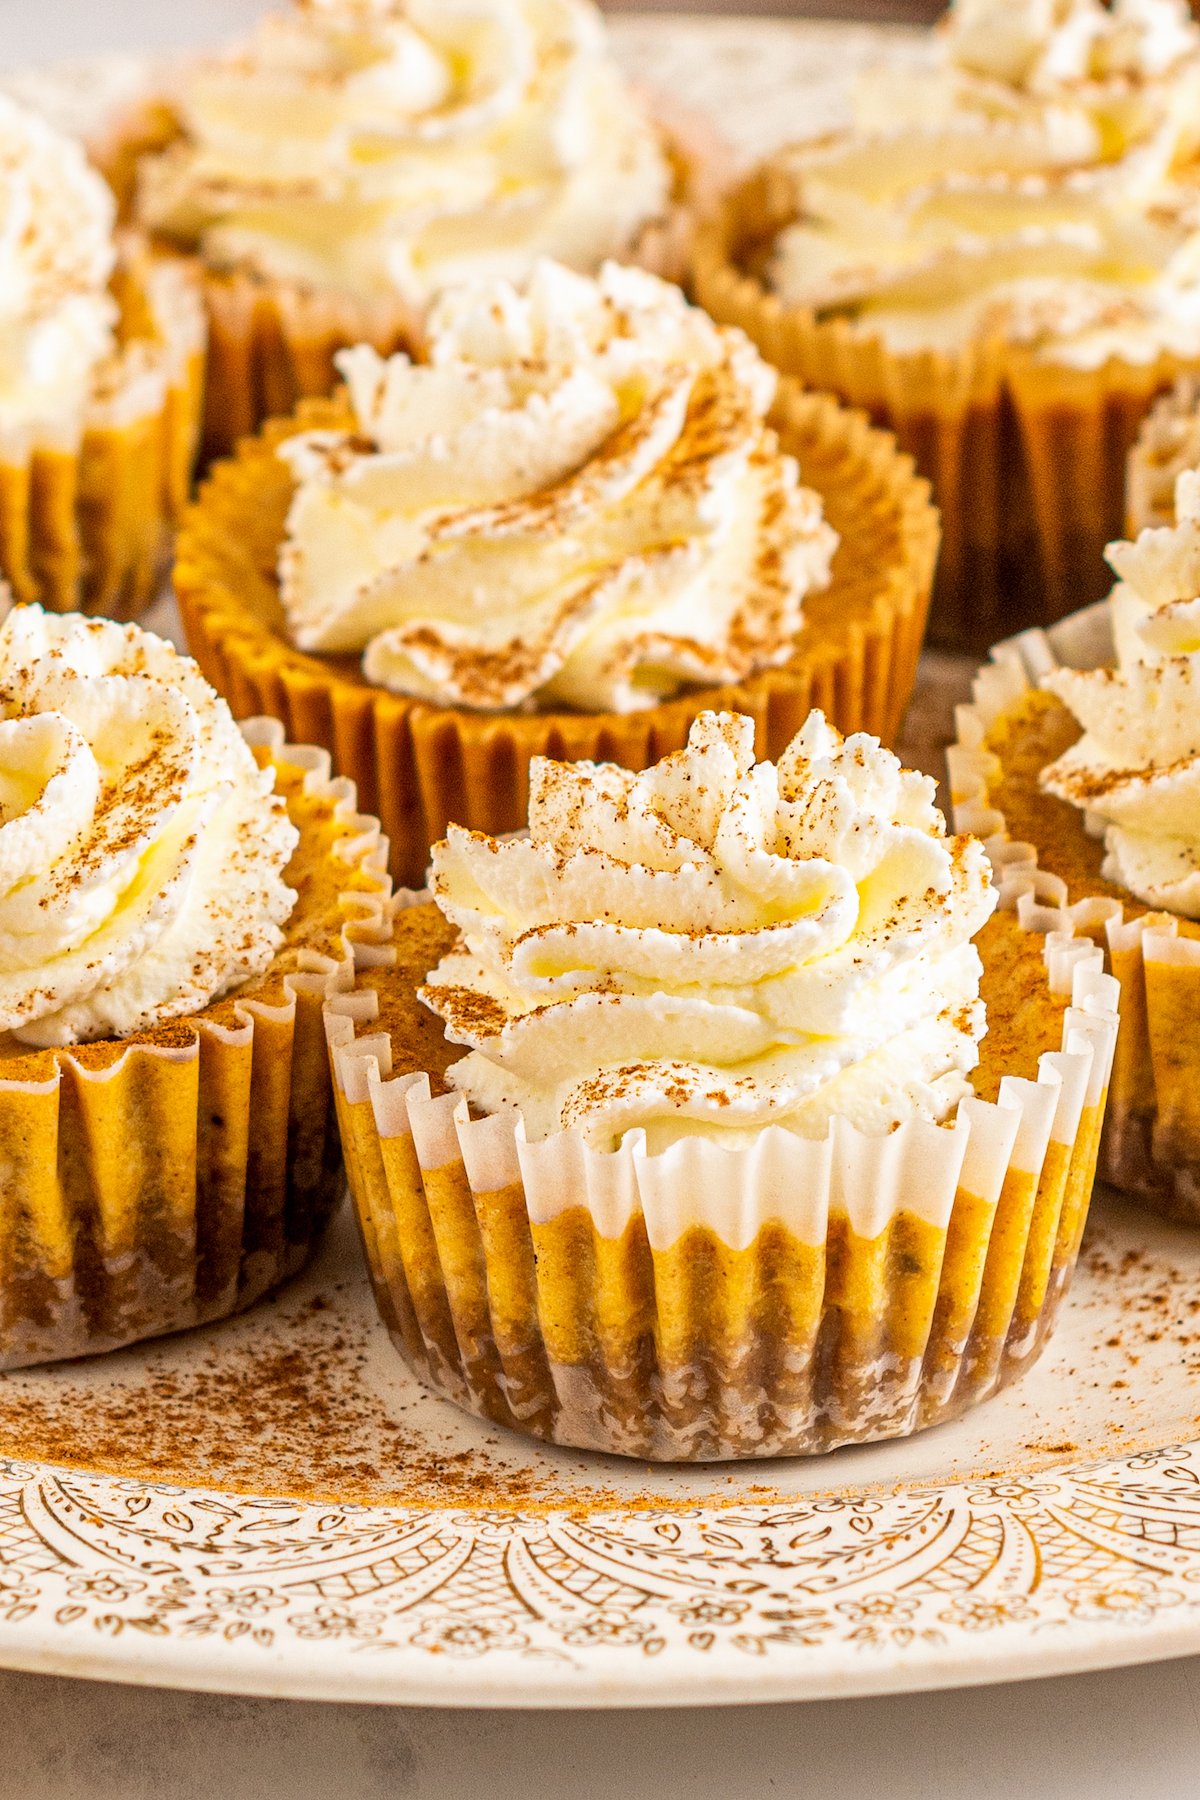 mini pumpkin cheesecakes the size of a cupcake with whipped cream on top